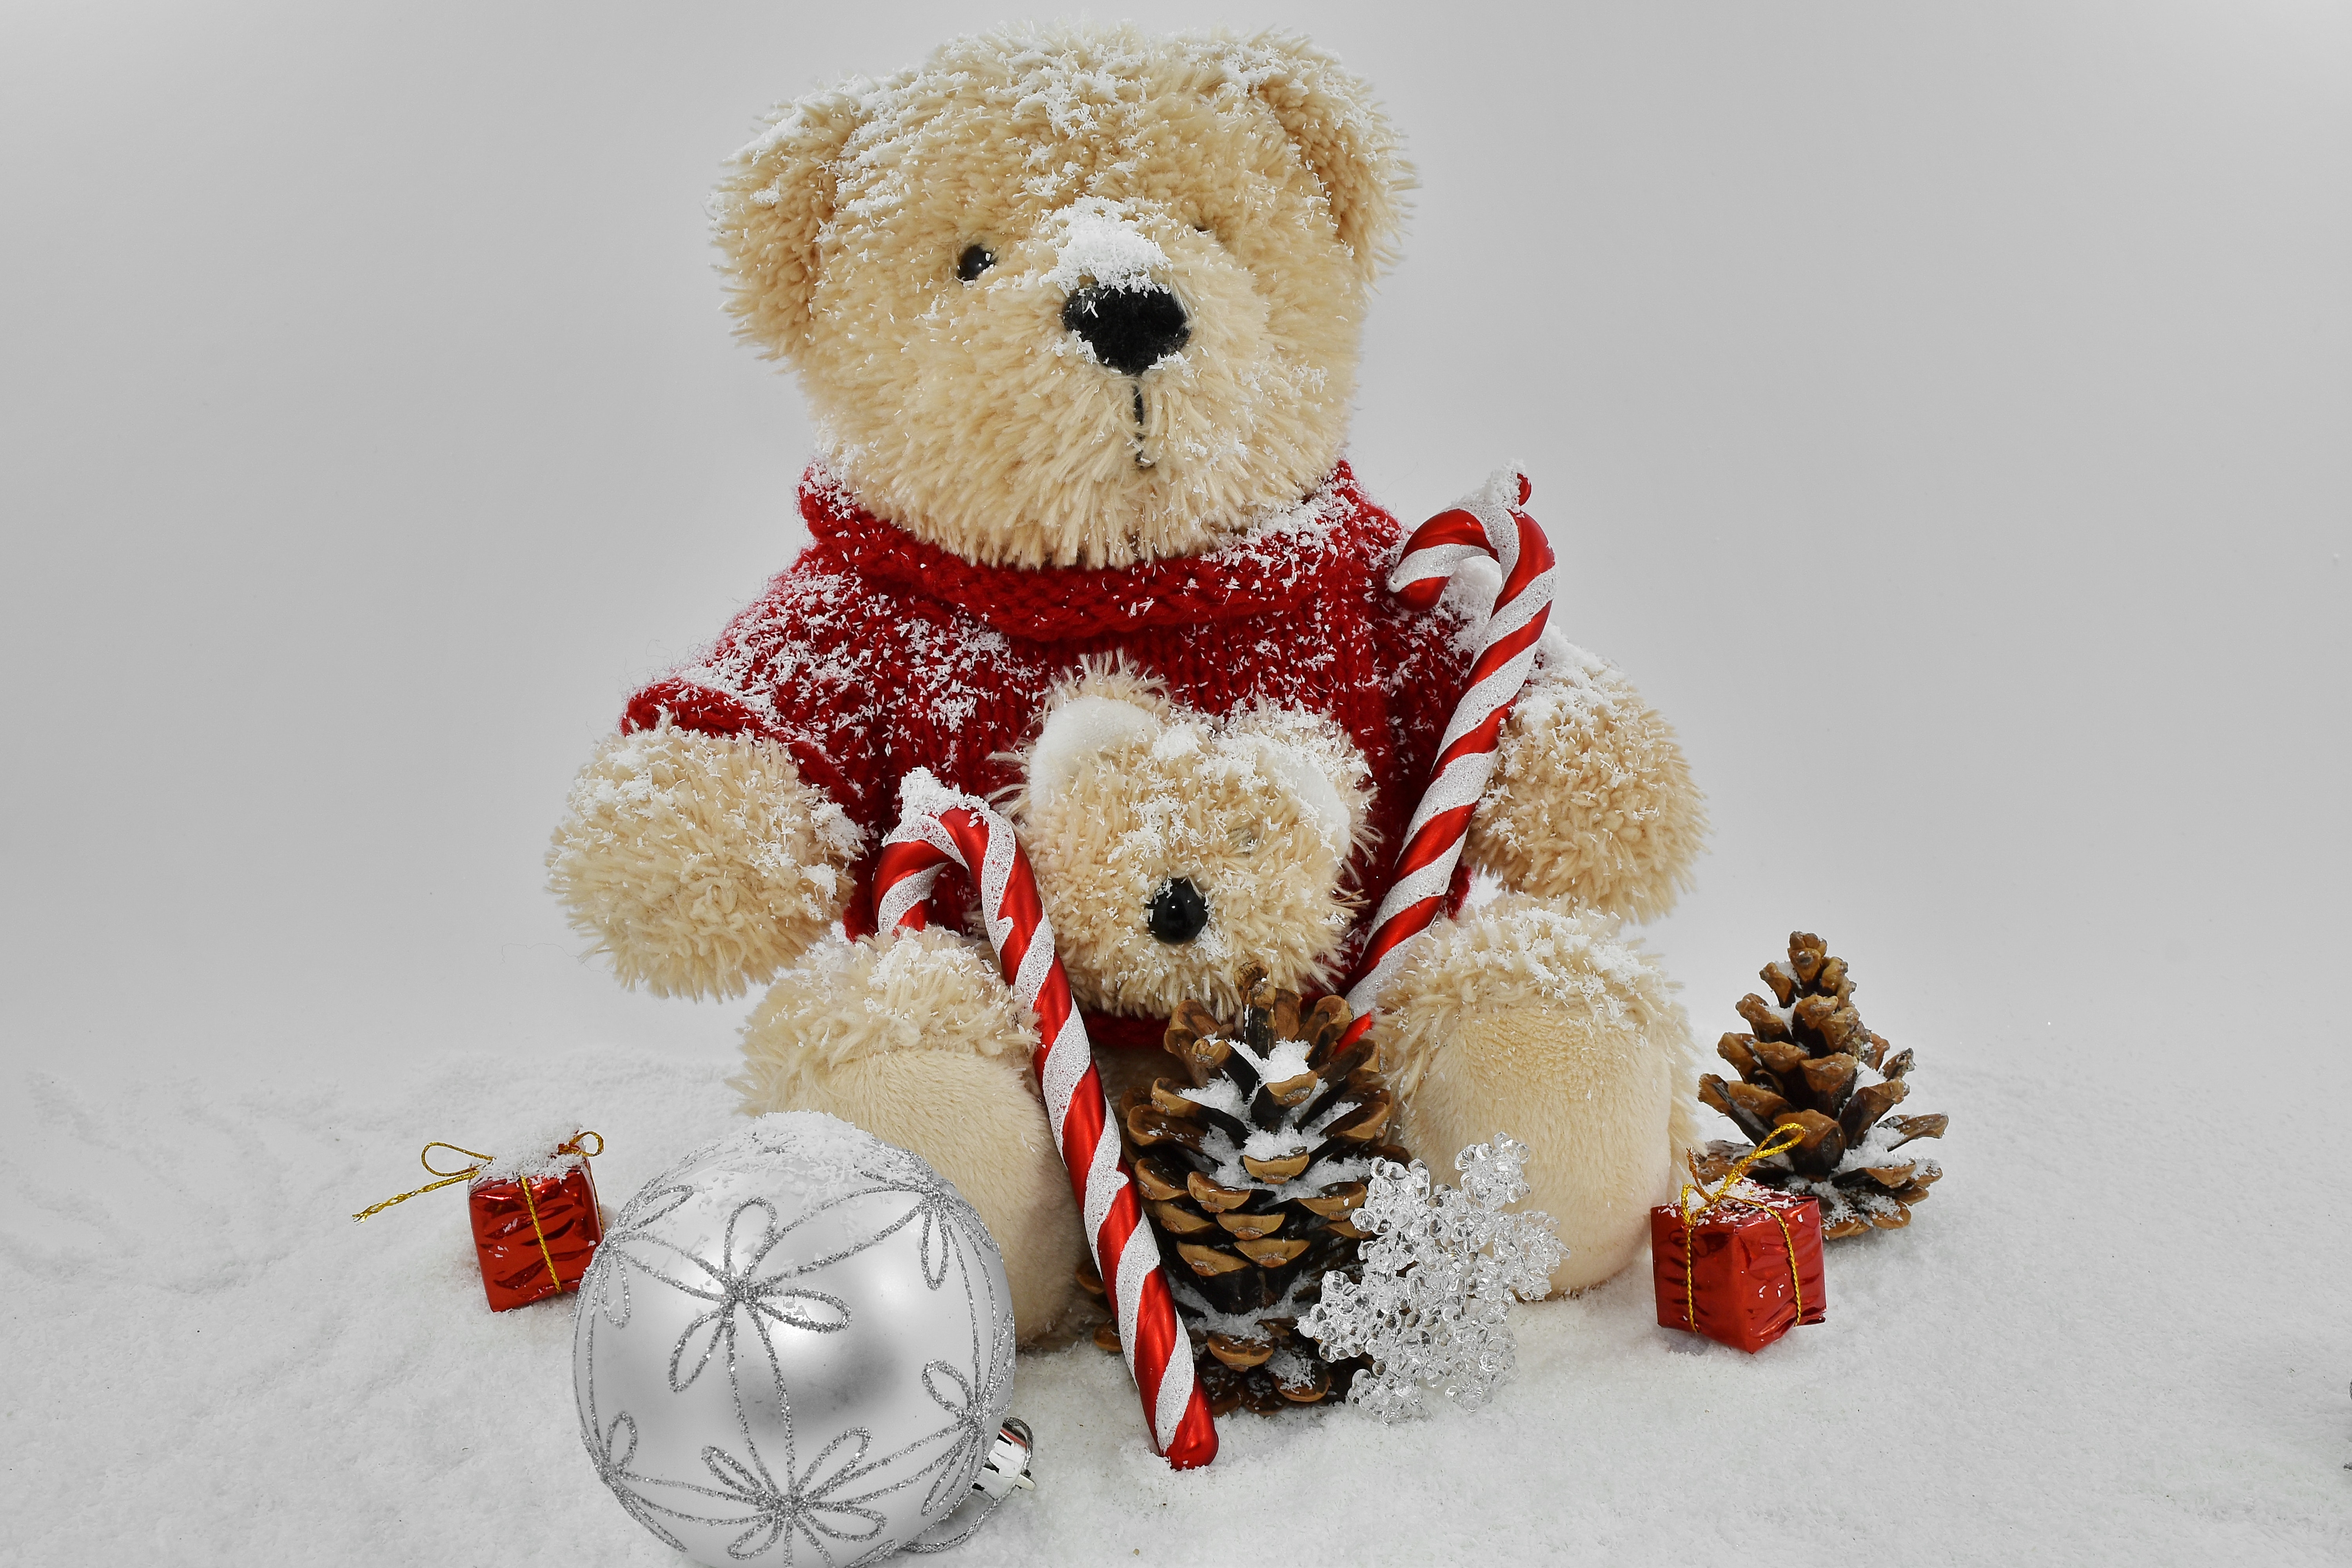 Free picture: christmas, gifts, ornament, teddy bear toy, snow, winter ...